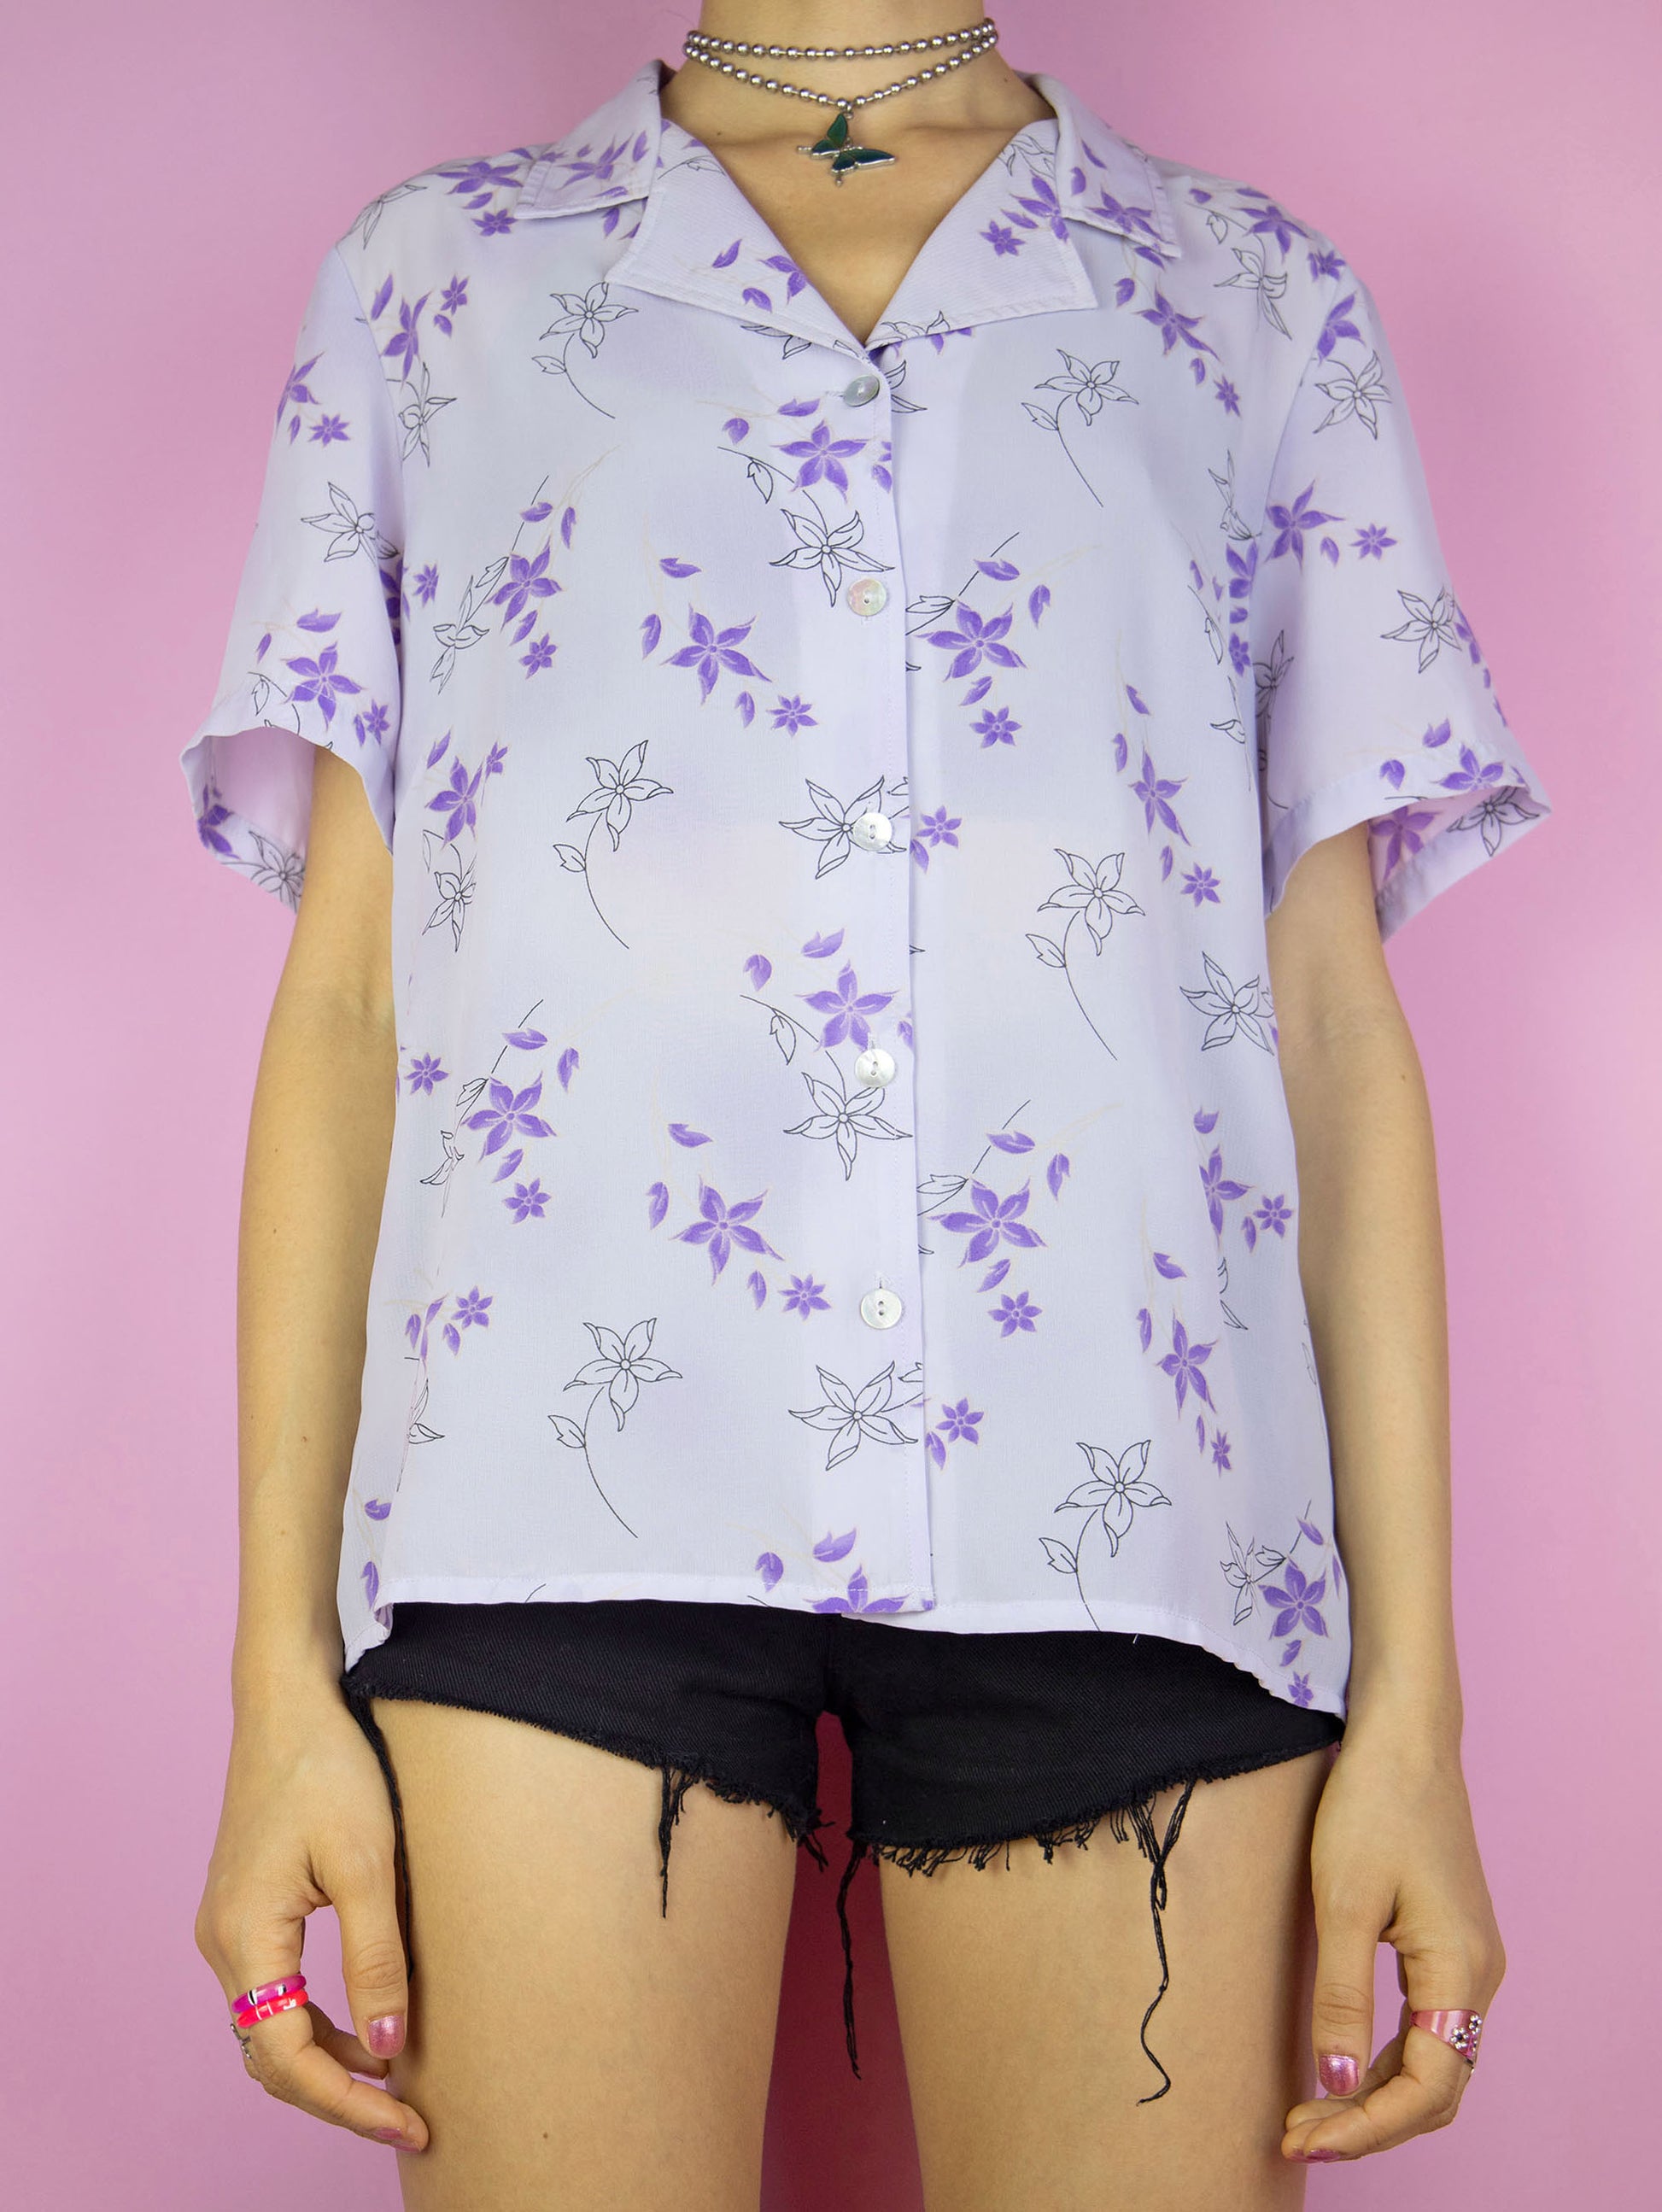 The Y2K Lilac Floral Print Blouse is a vintage 2000s boho cottagecore style light pastel purple short sleeve summer shirt with a collar and buttons.